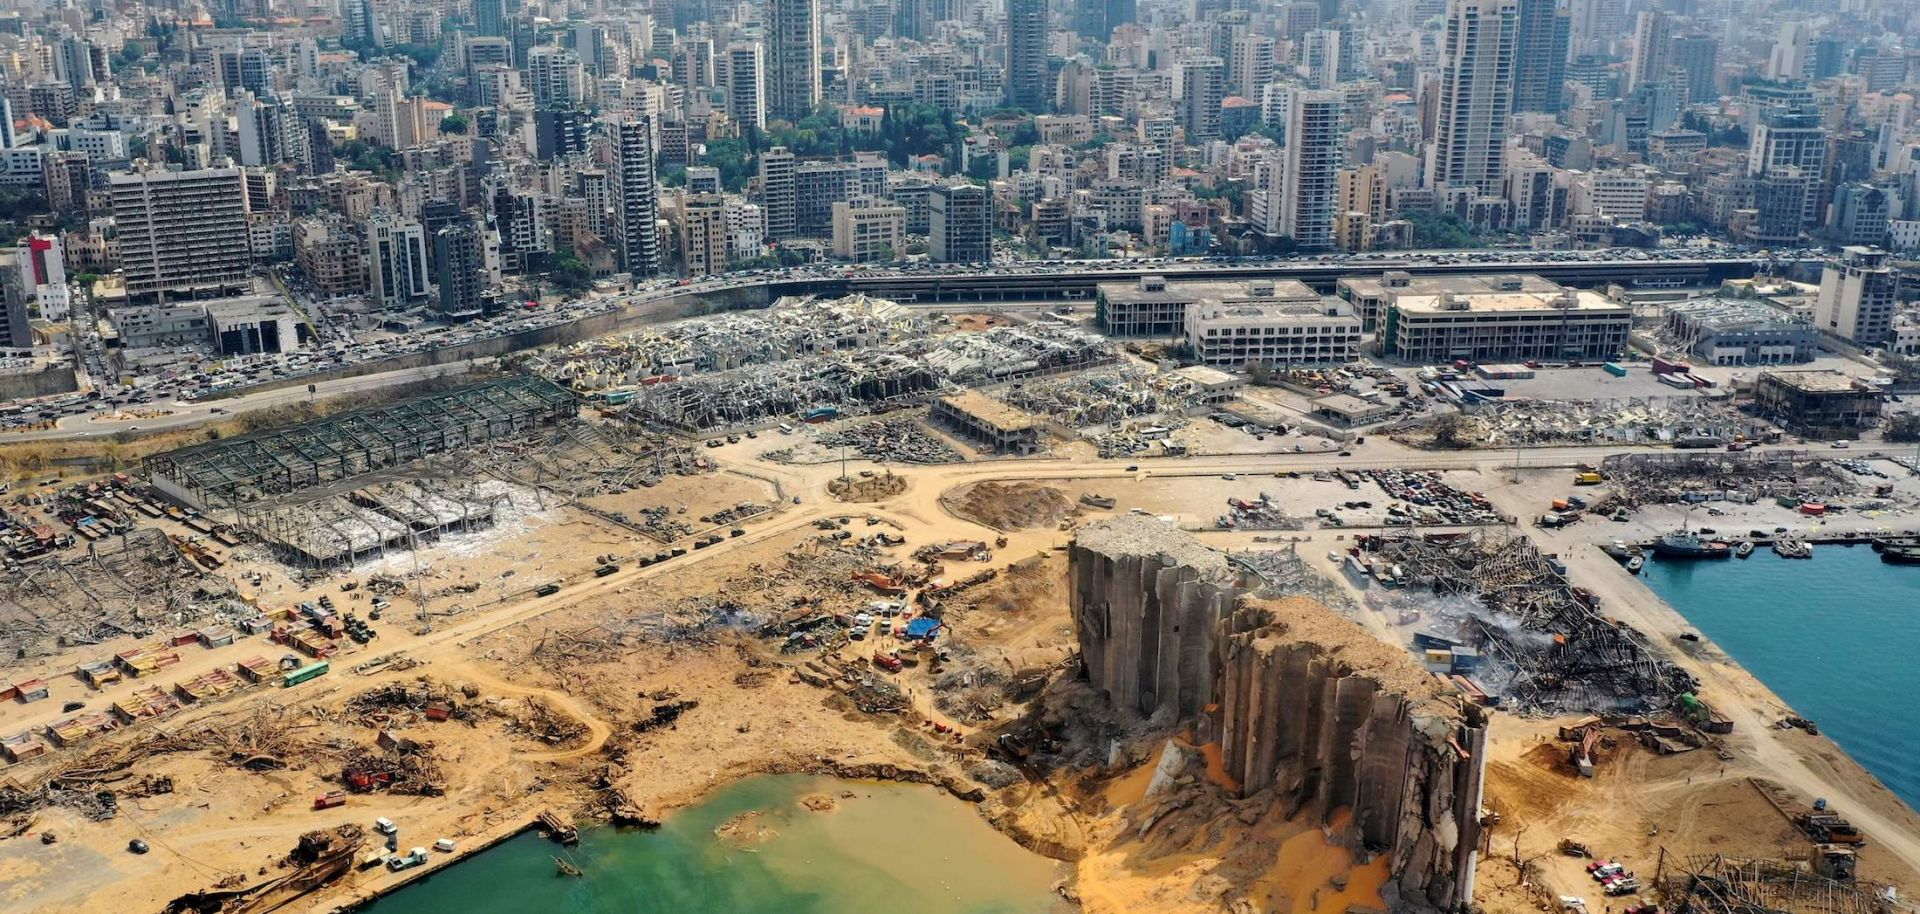 The port of Beirut on Aug. 7, 2020, after a massive blast caused widespread devastation in the Lebanese capital.